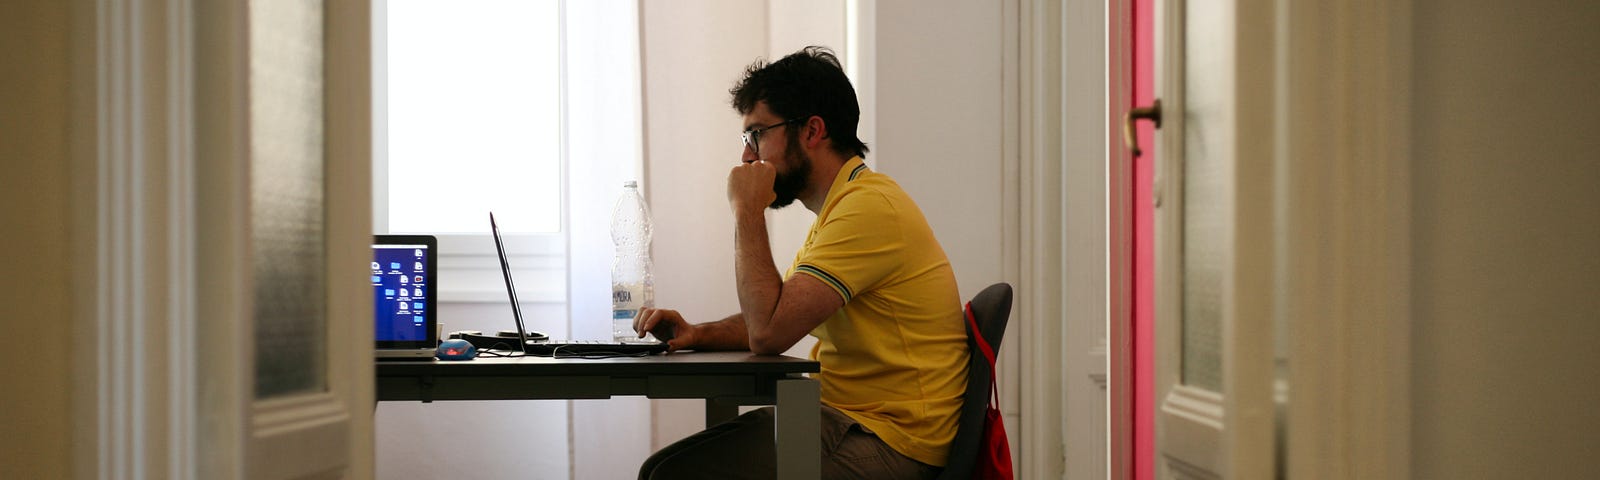 Man in yellow shirt sitting at a table, typing on laptop computer